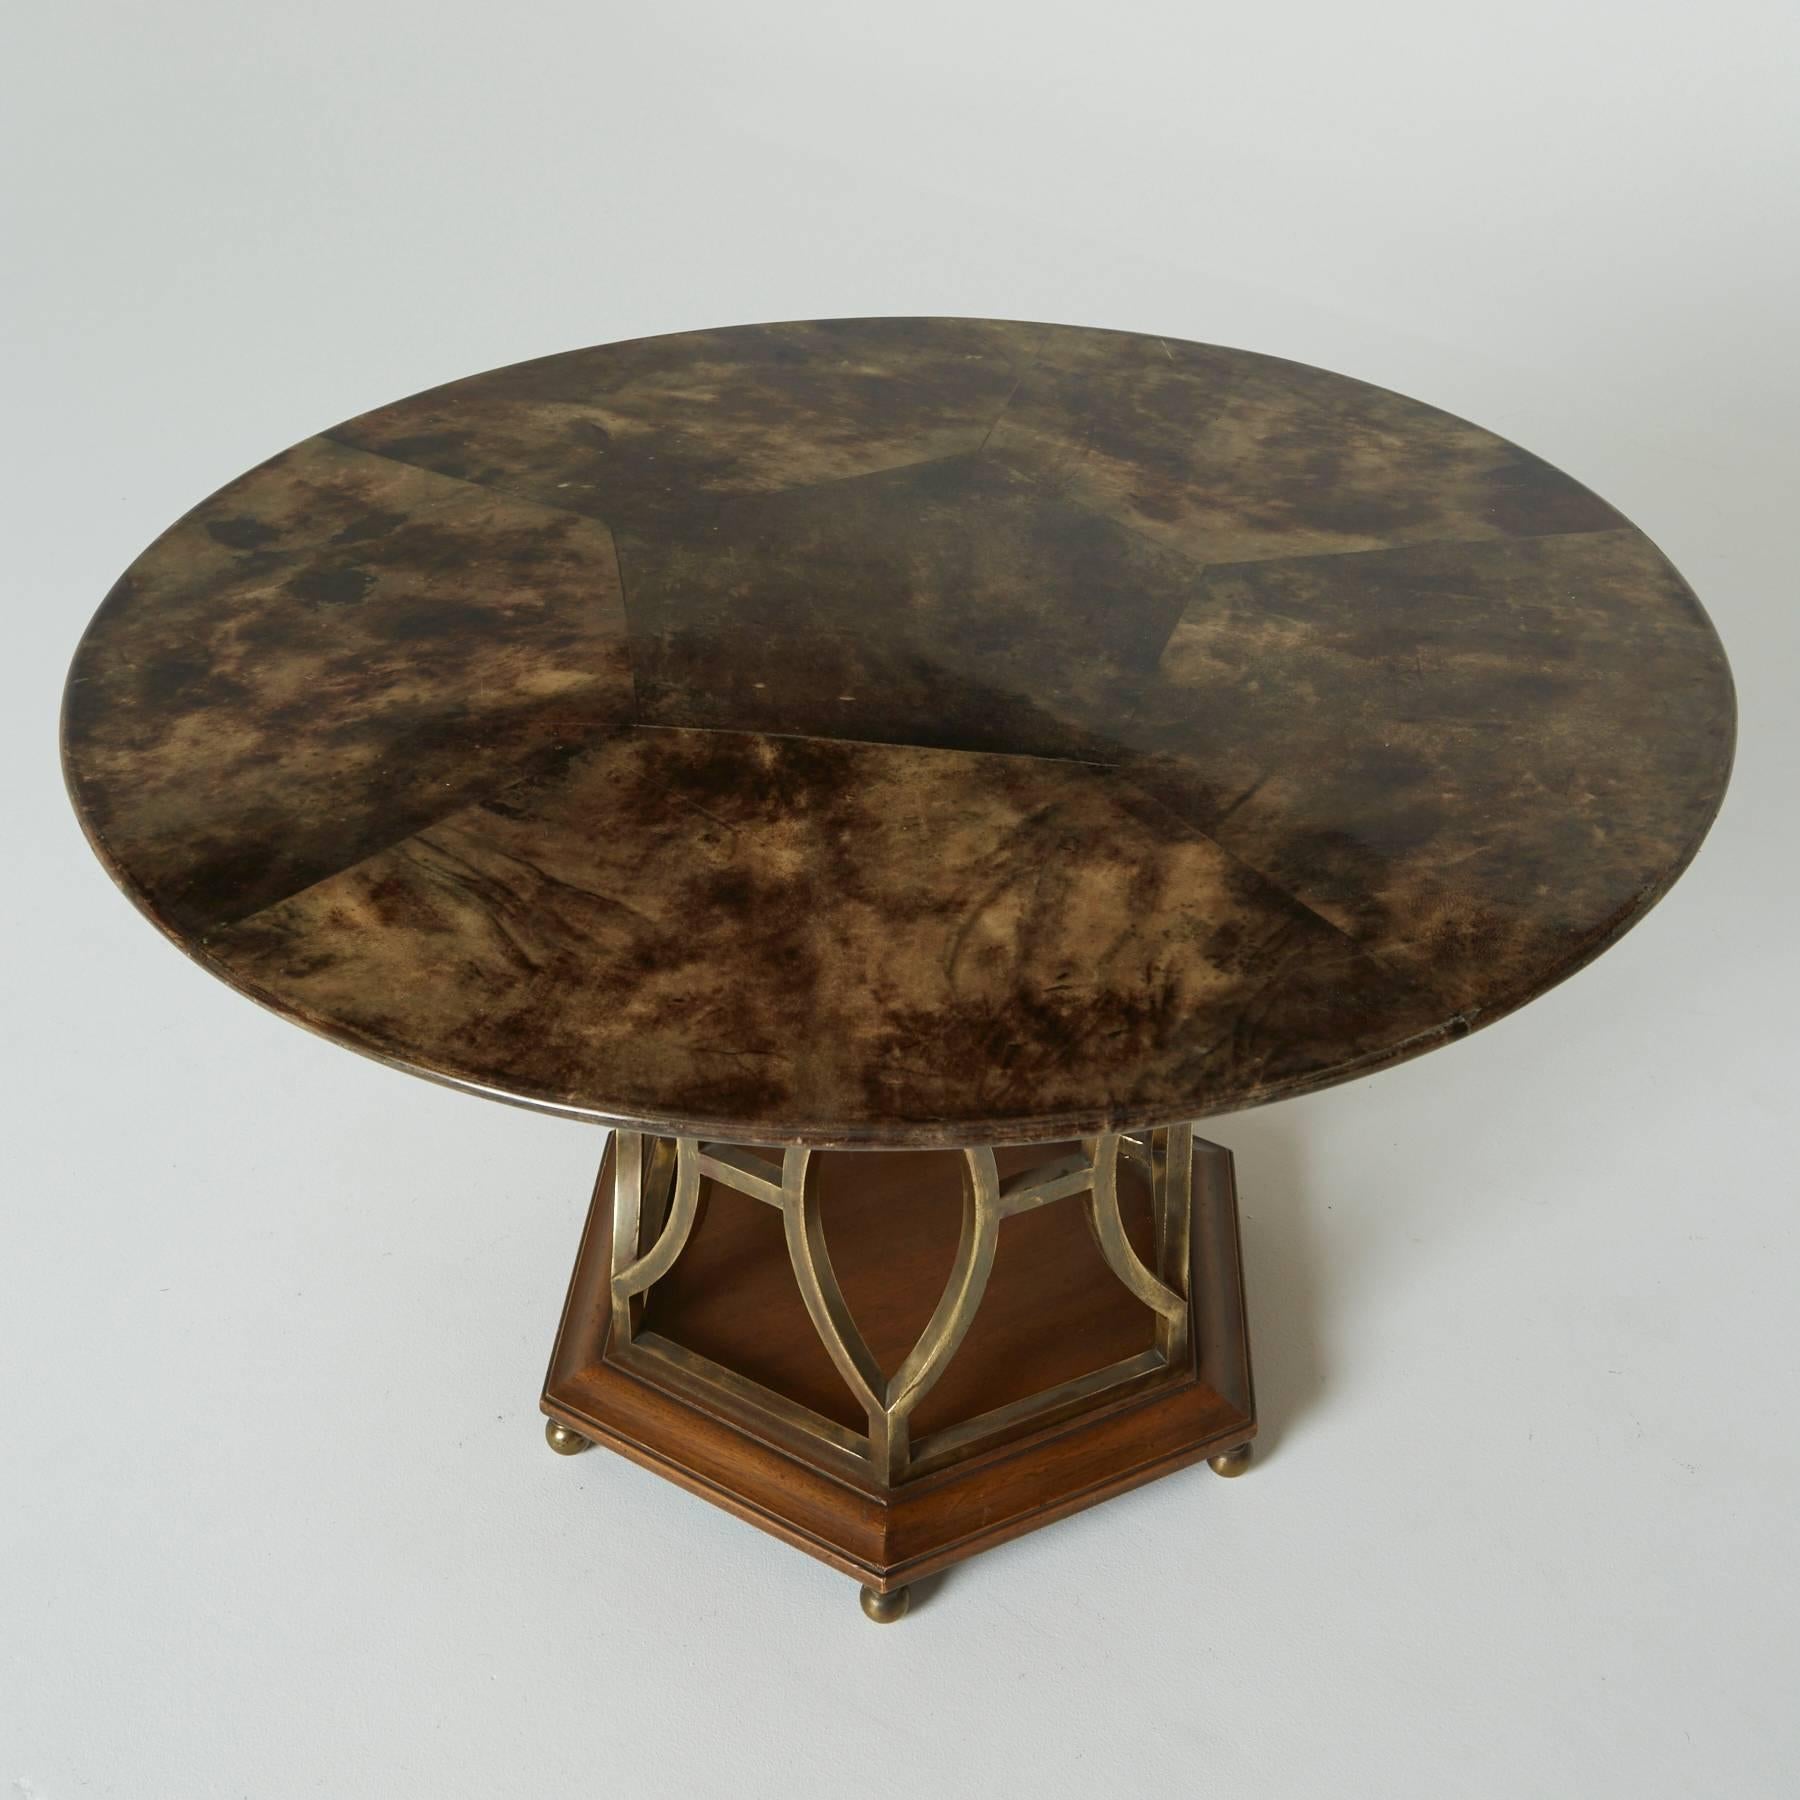 Brown lacquered goatskin table top is marbled in texture, with a polygonal pattern which is mirrored throughout the whole piece. The round dining surface rests on angular wooden mounts, below, a sculptural brass table base which is rich with